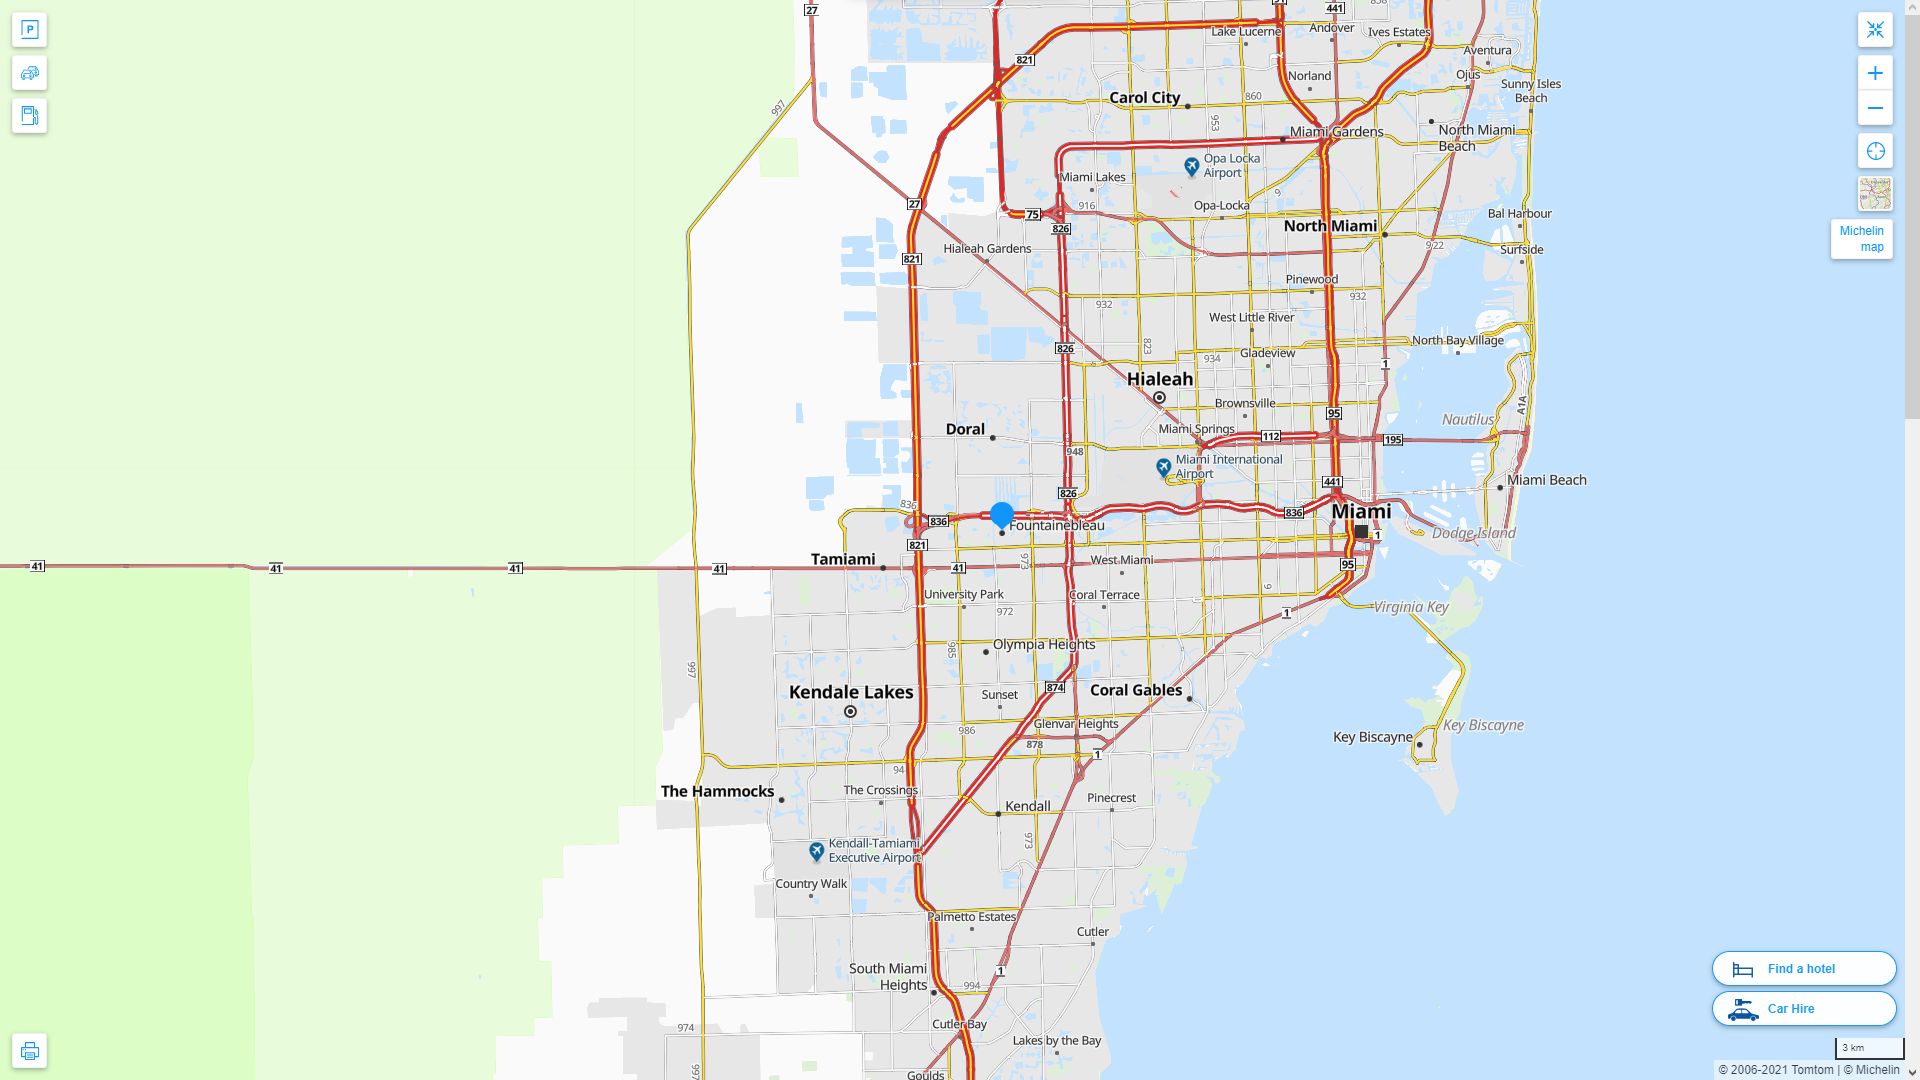 Fountainebleau Florida Highway and Road Map